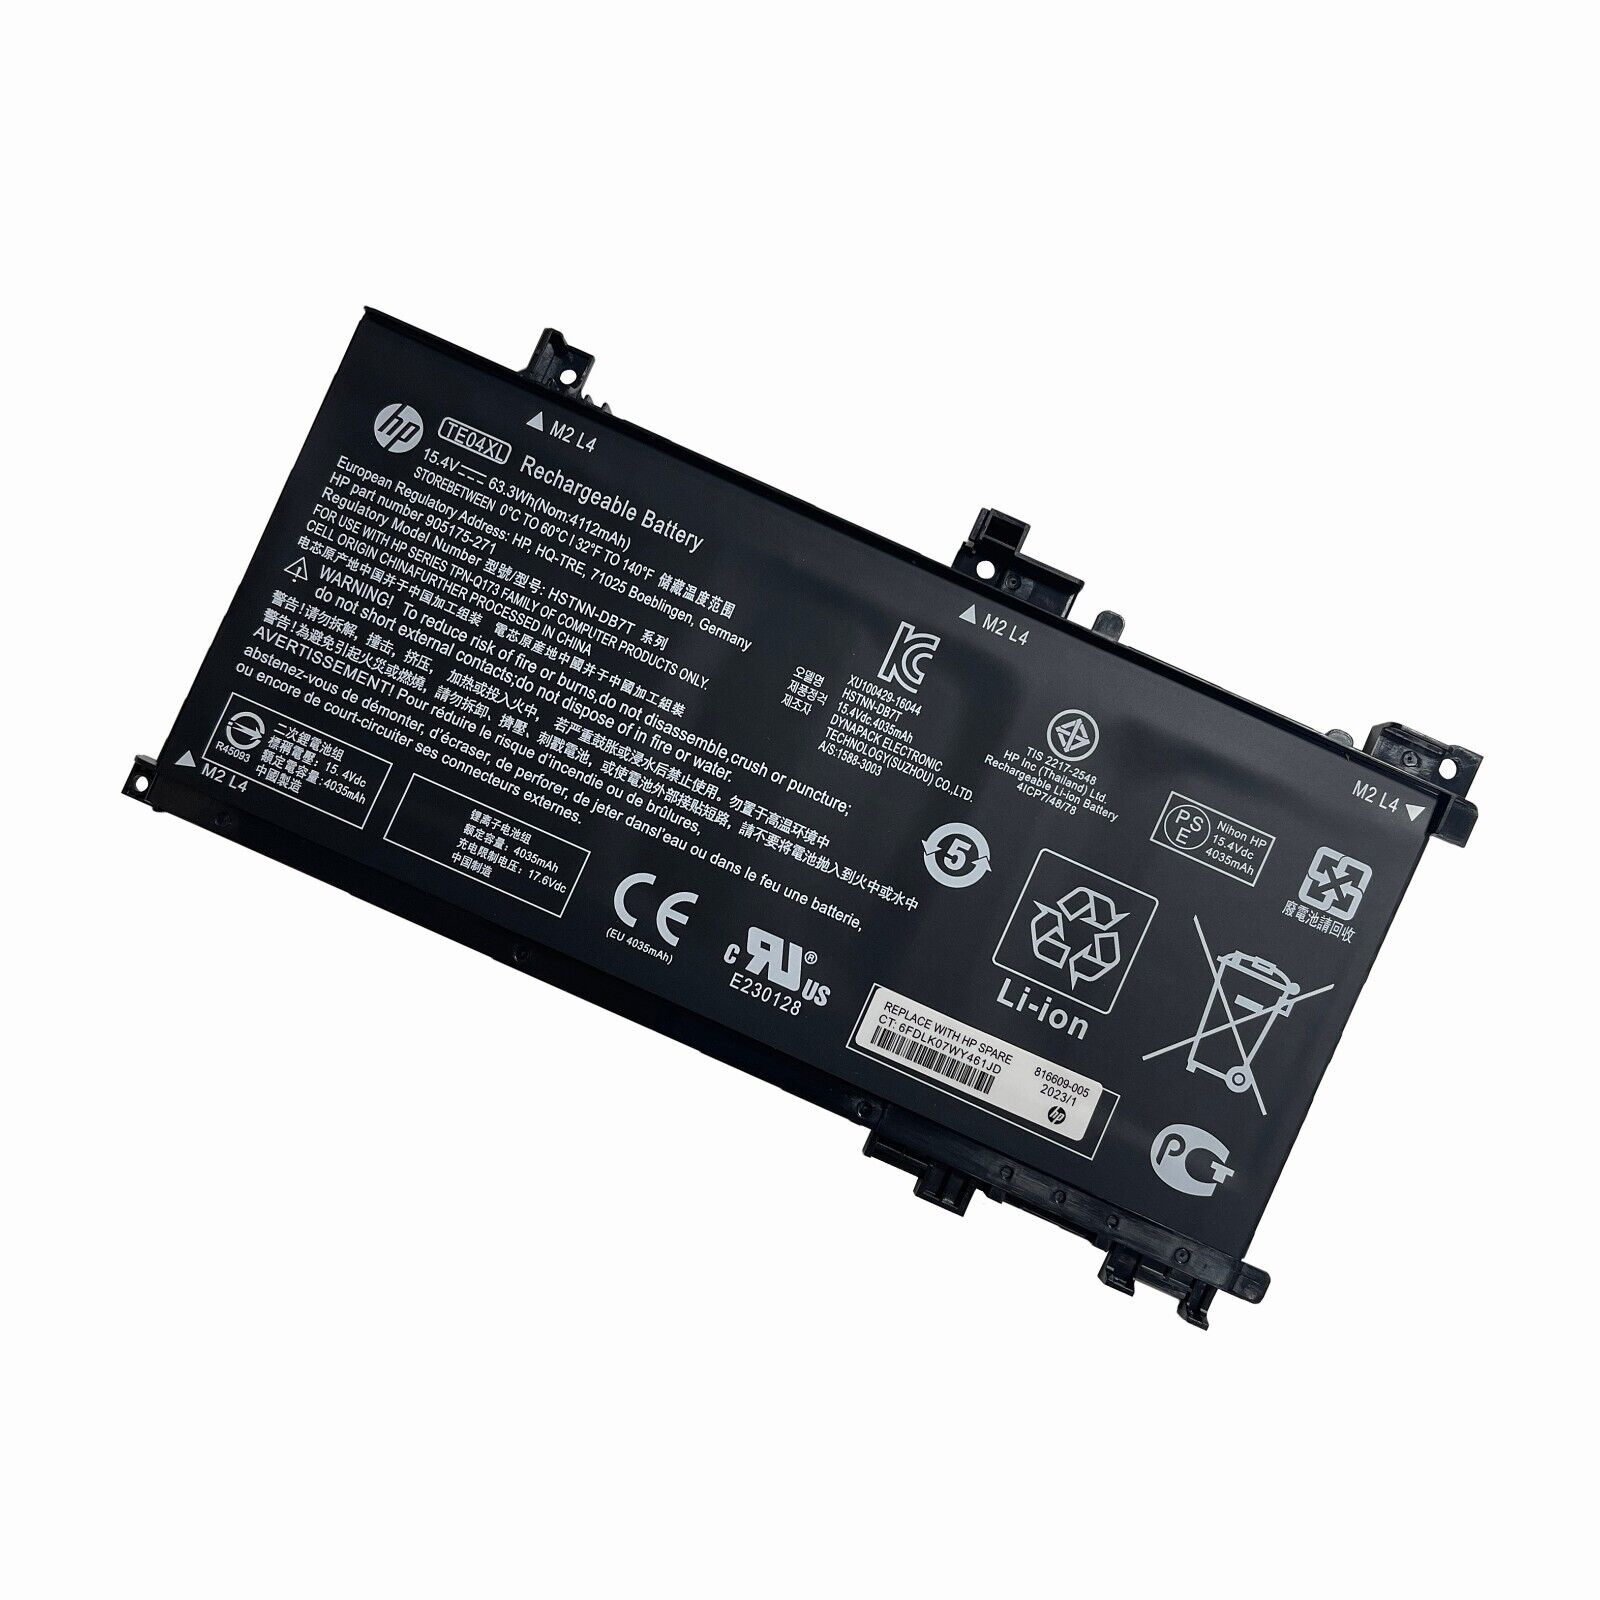 NEW OEM Genuine TE04XL Battery for HP Omen 15-AX200 15-BC 905175-2C1 905277-855